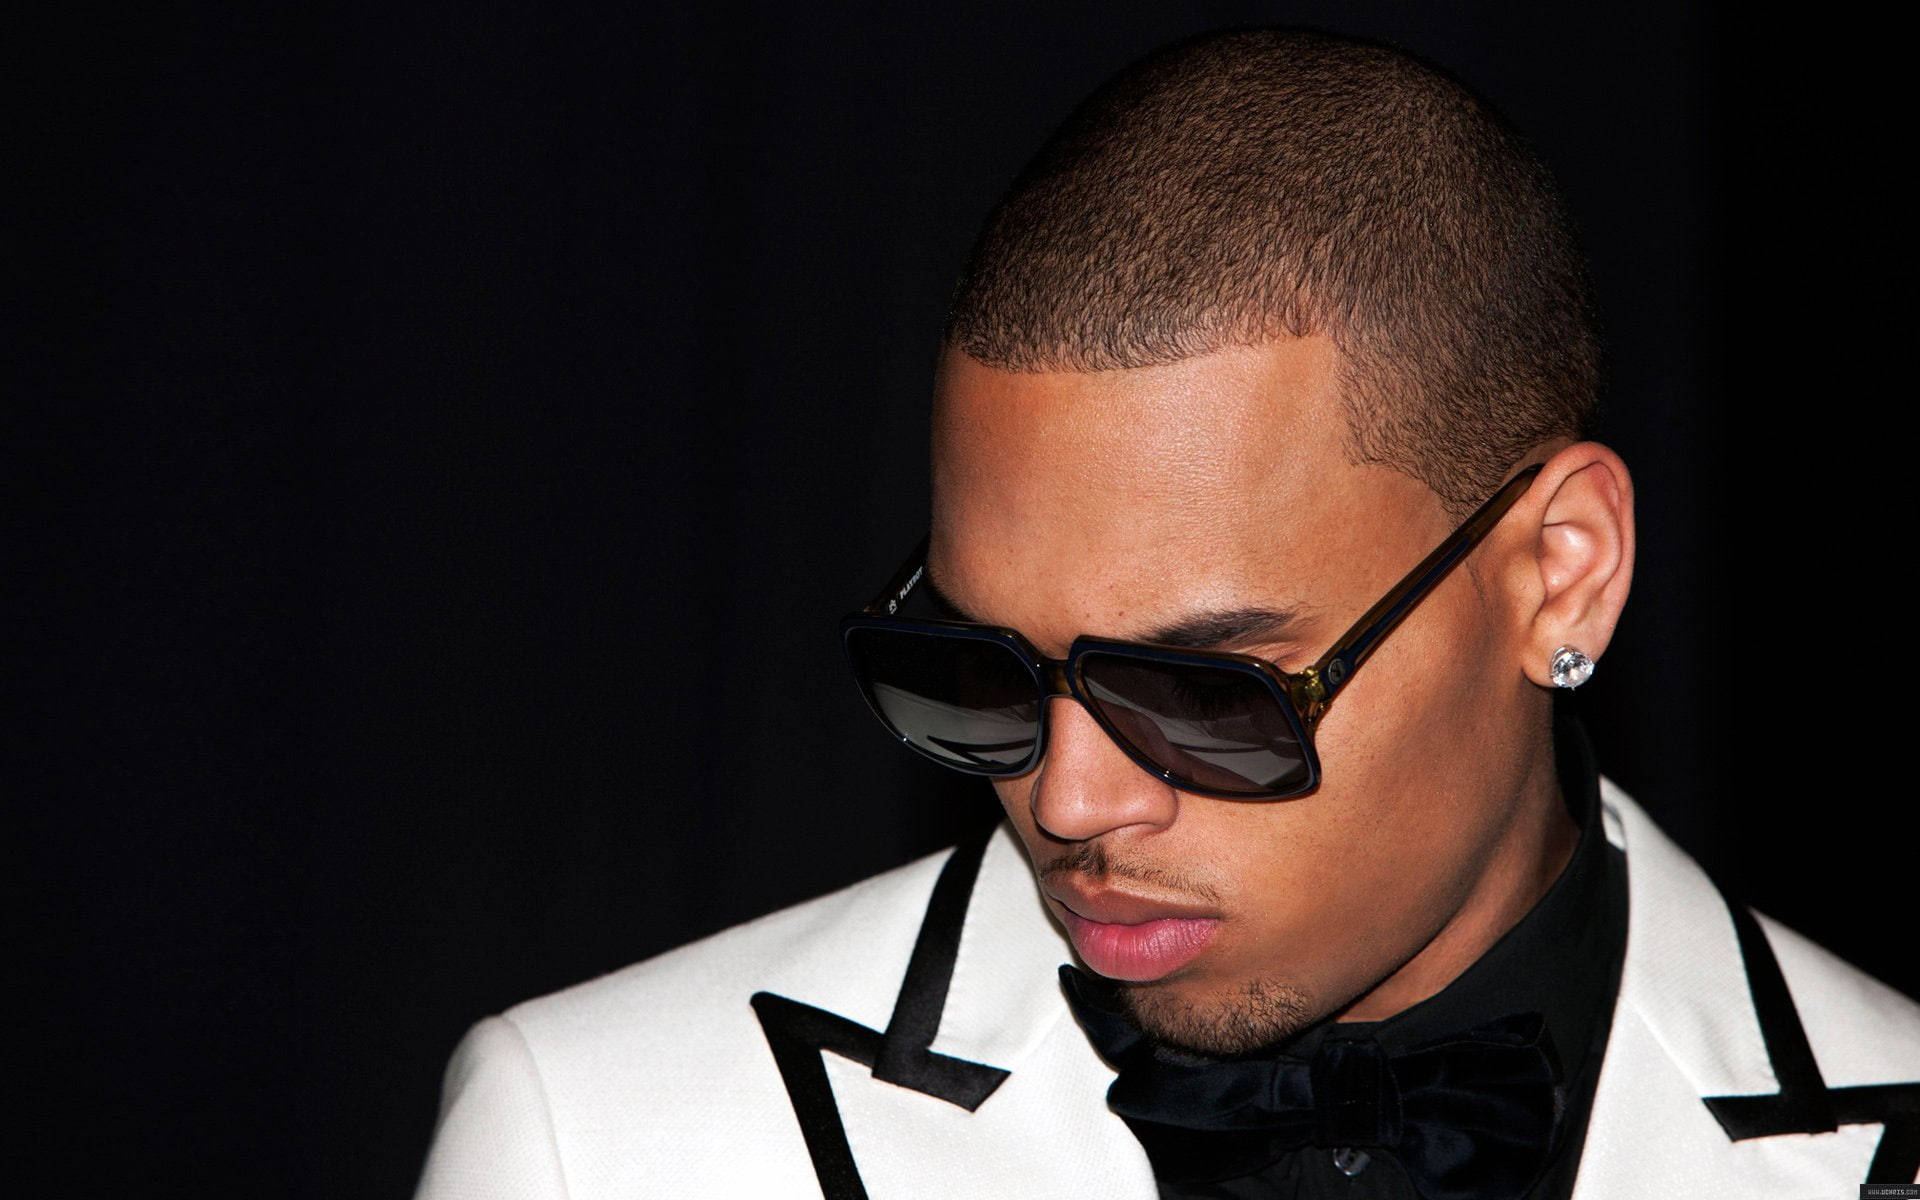 Chris Brown With Sunglasses